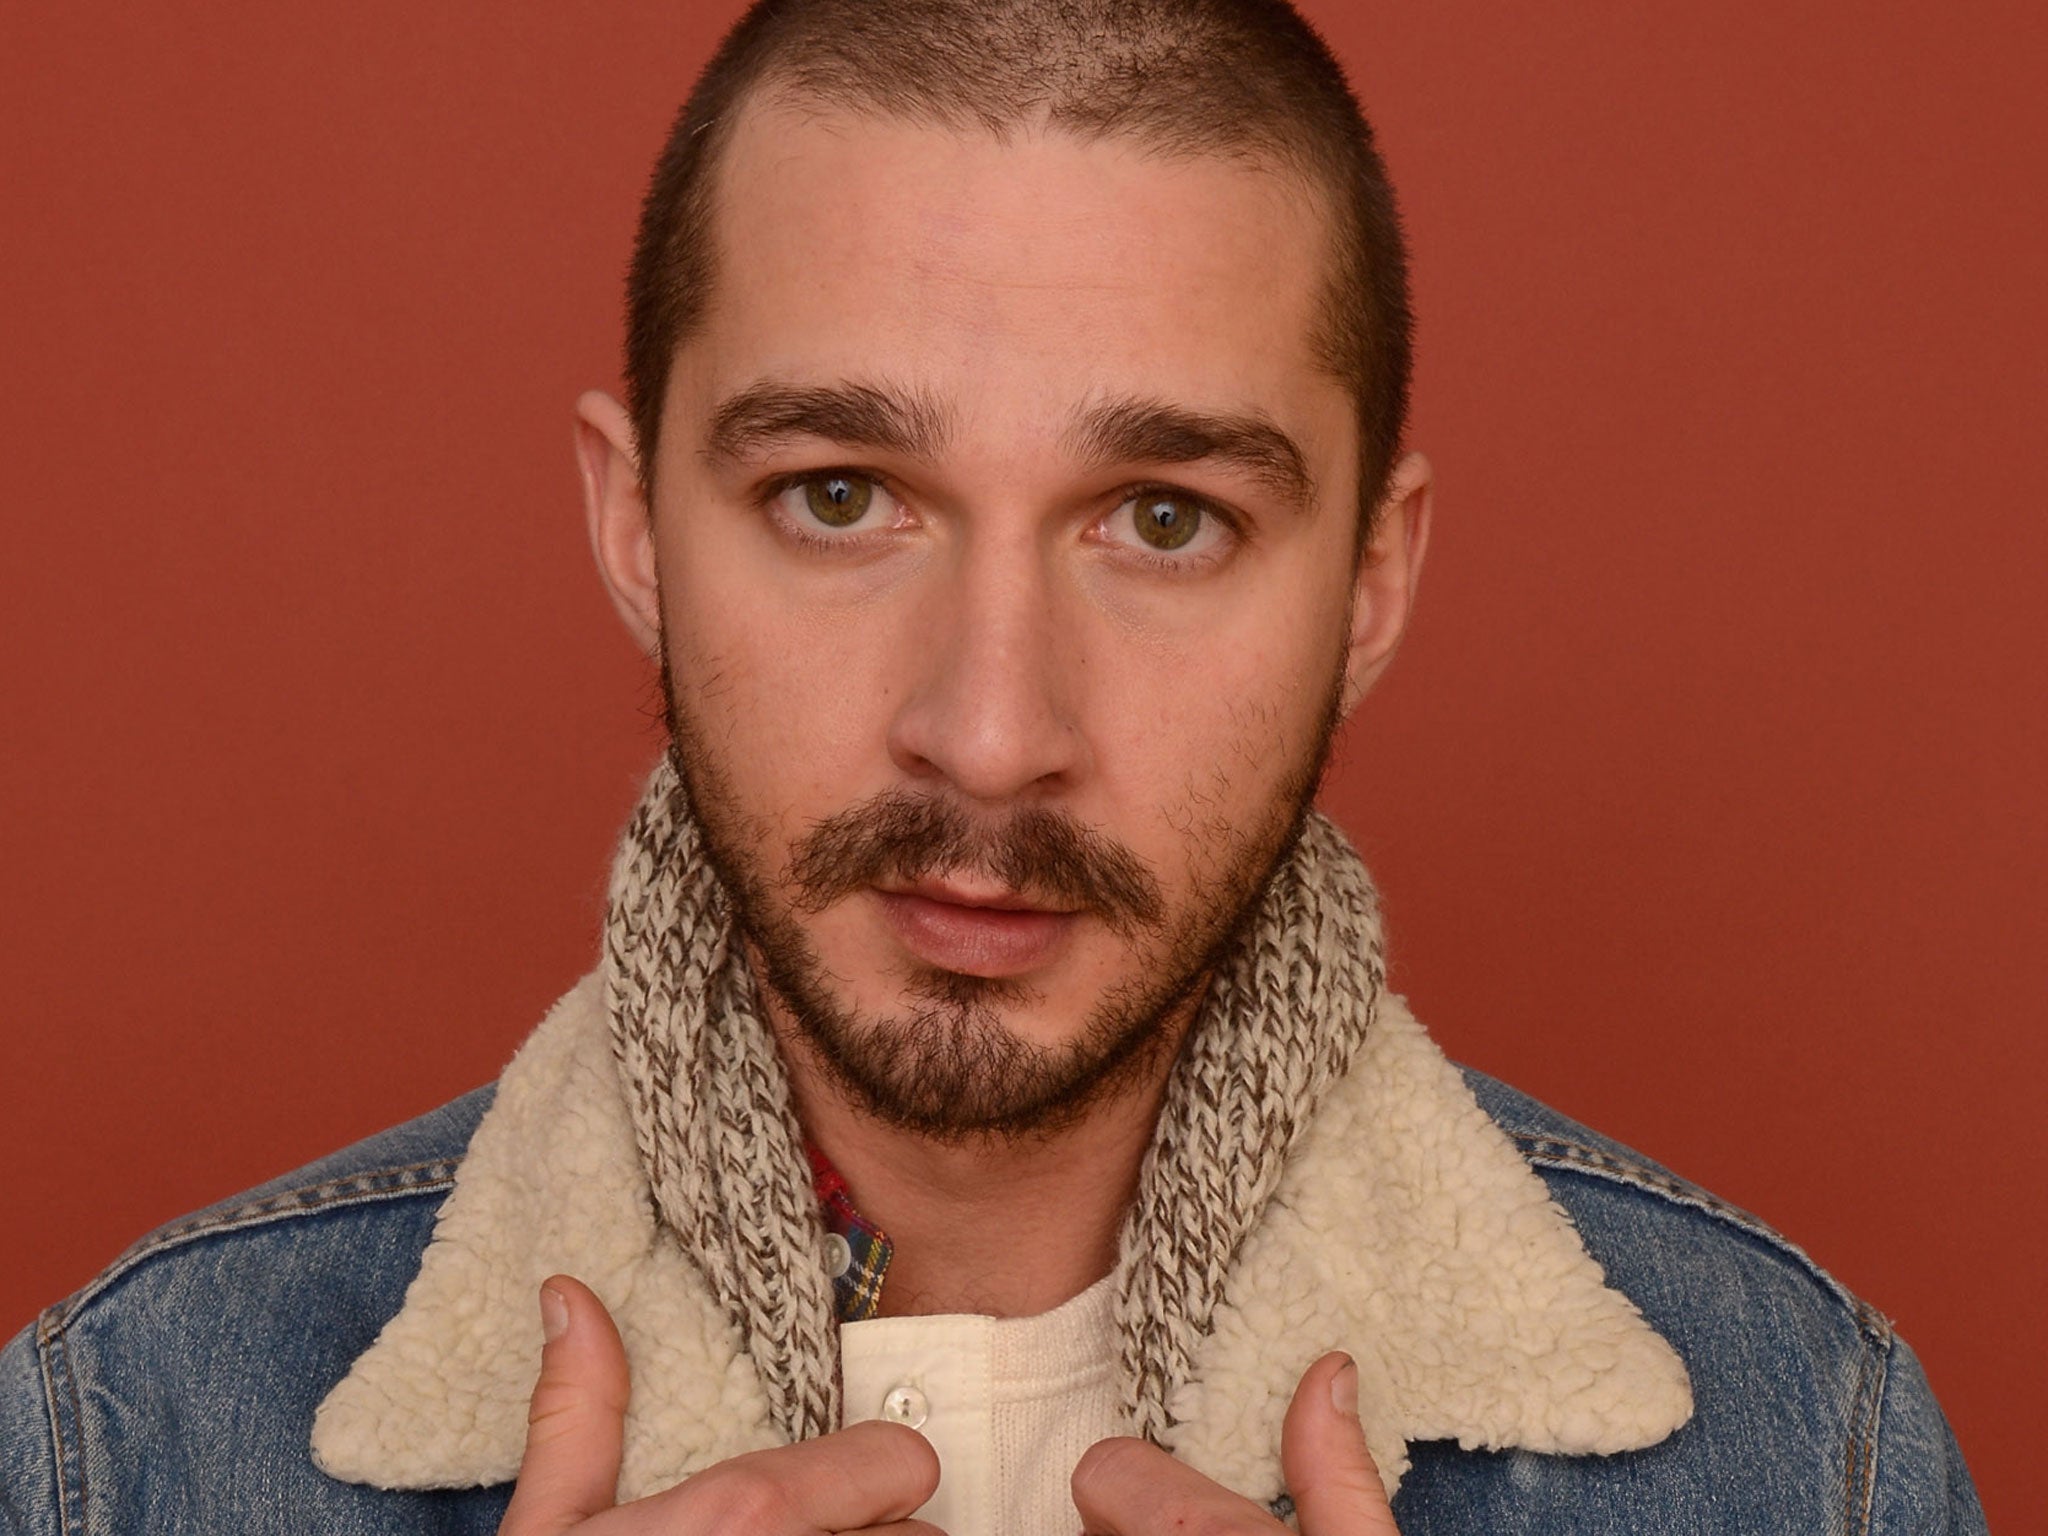 Shia LaBeouf made the claims during an interview last week